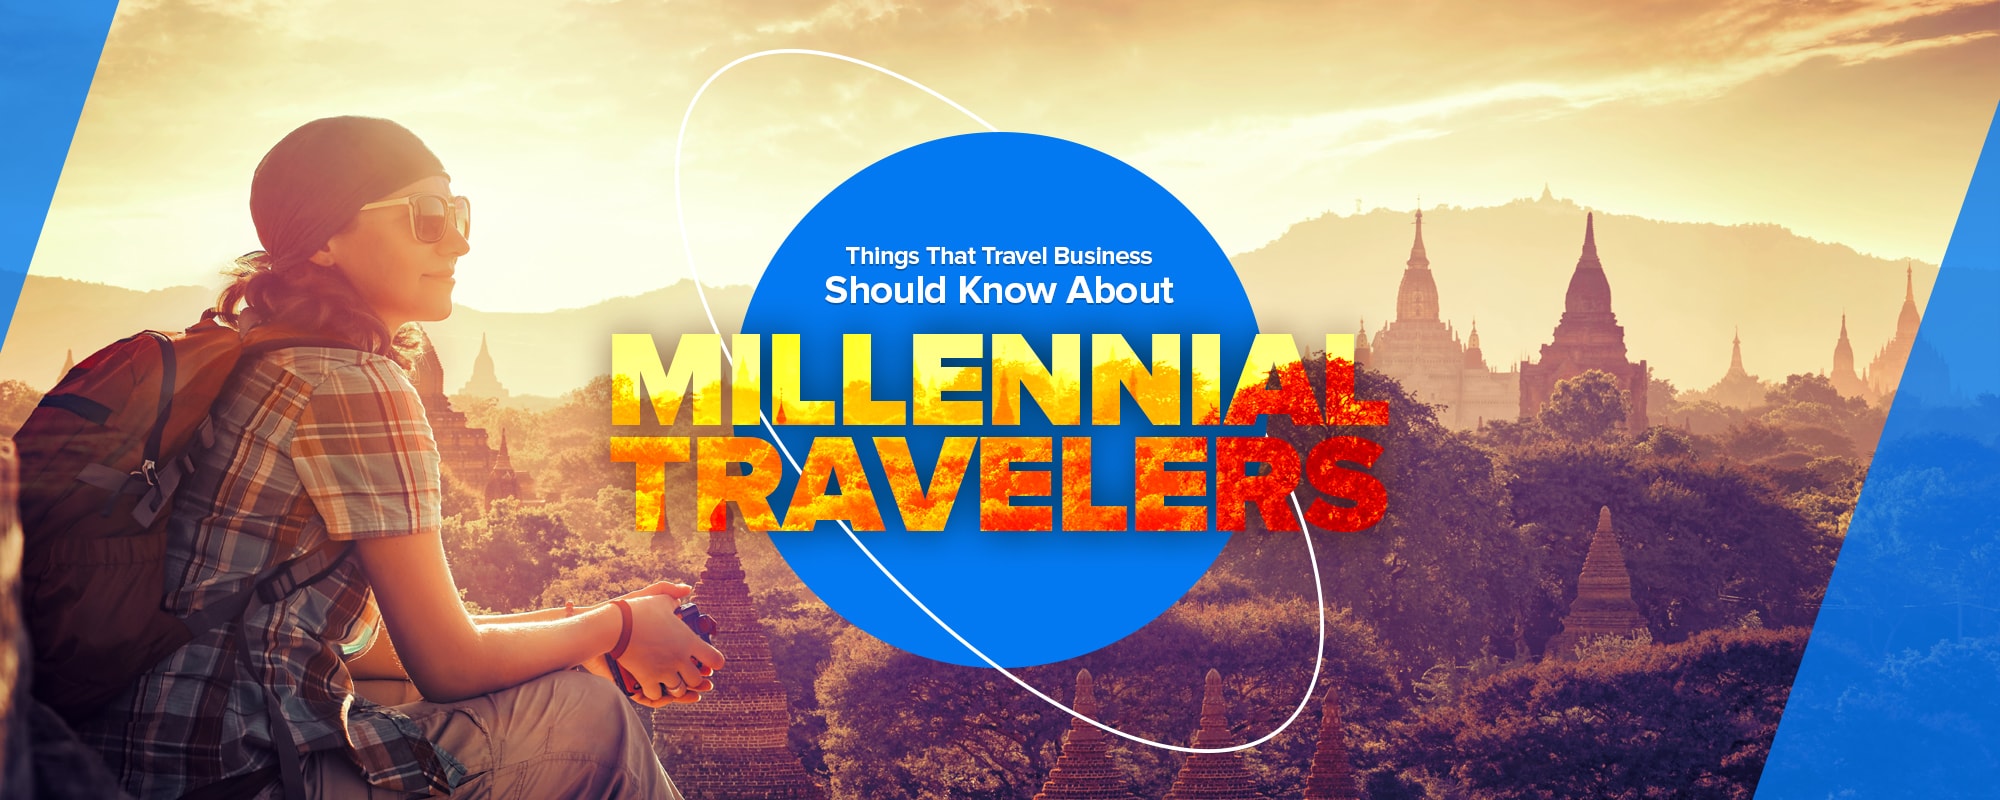 Why Millennials Want To Be Treated Differently By Travel Businesses